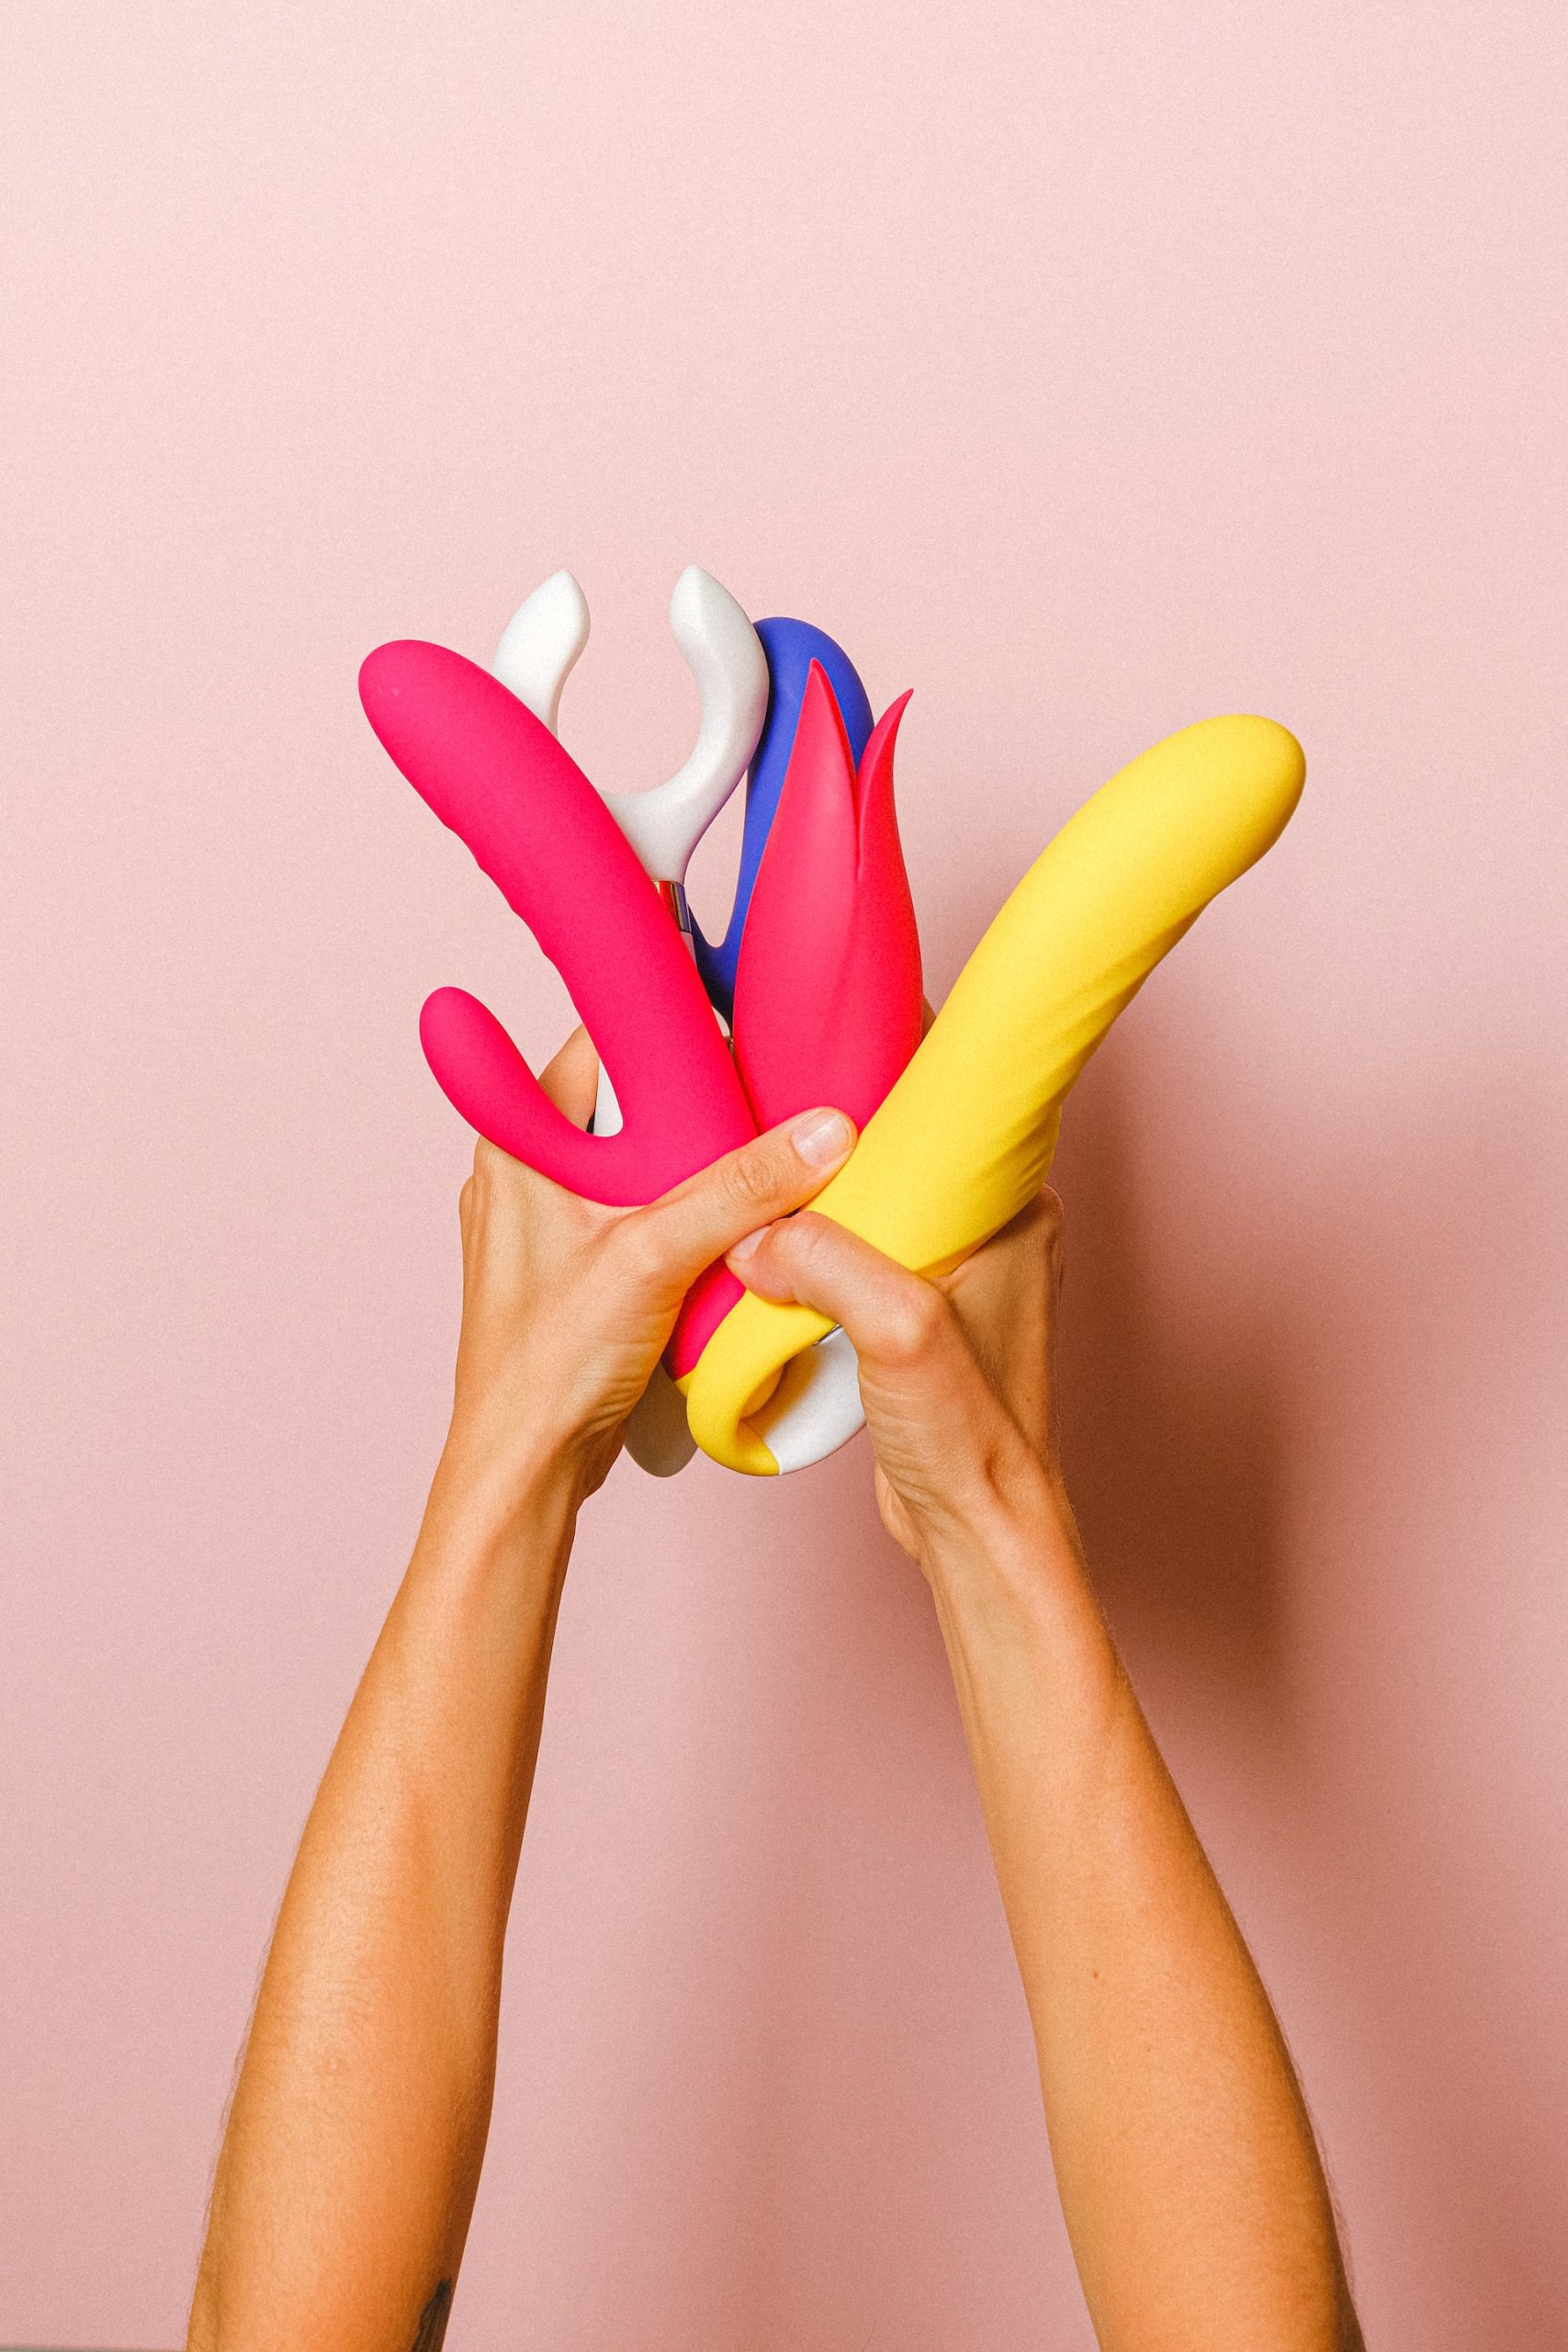 Explore Your Pleasure with Sex Toys!